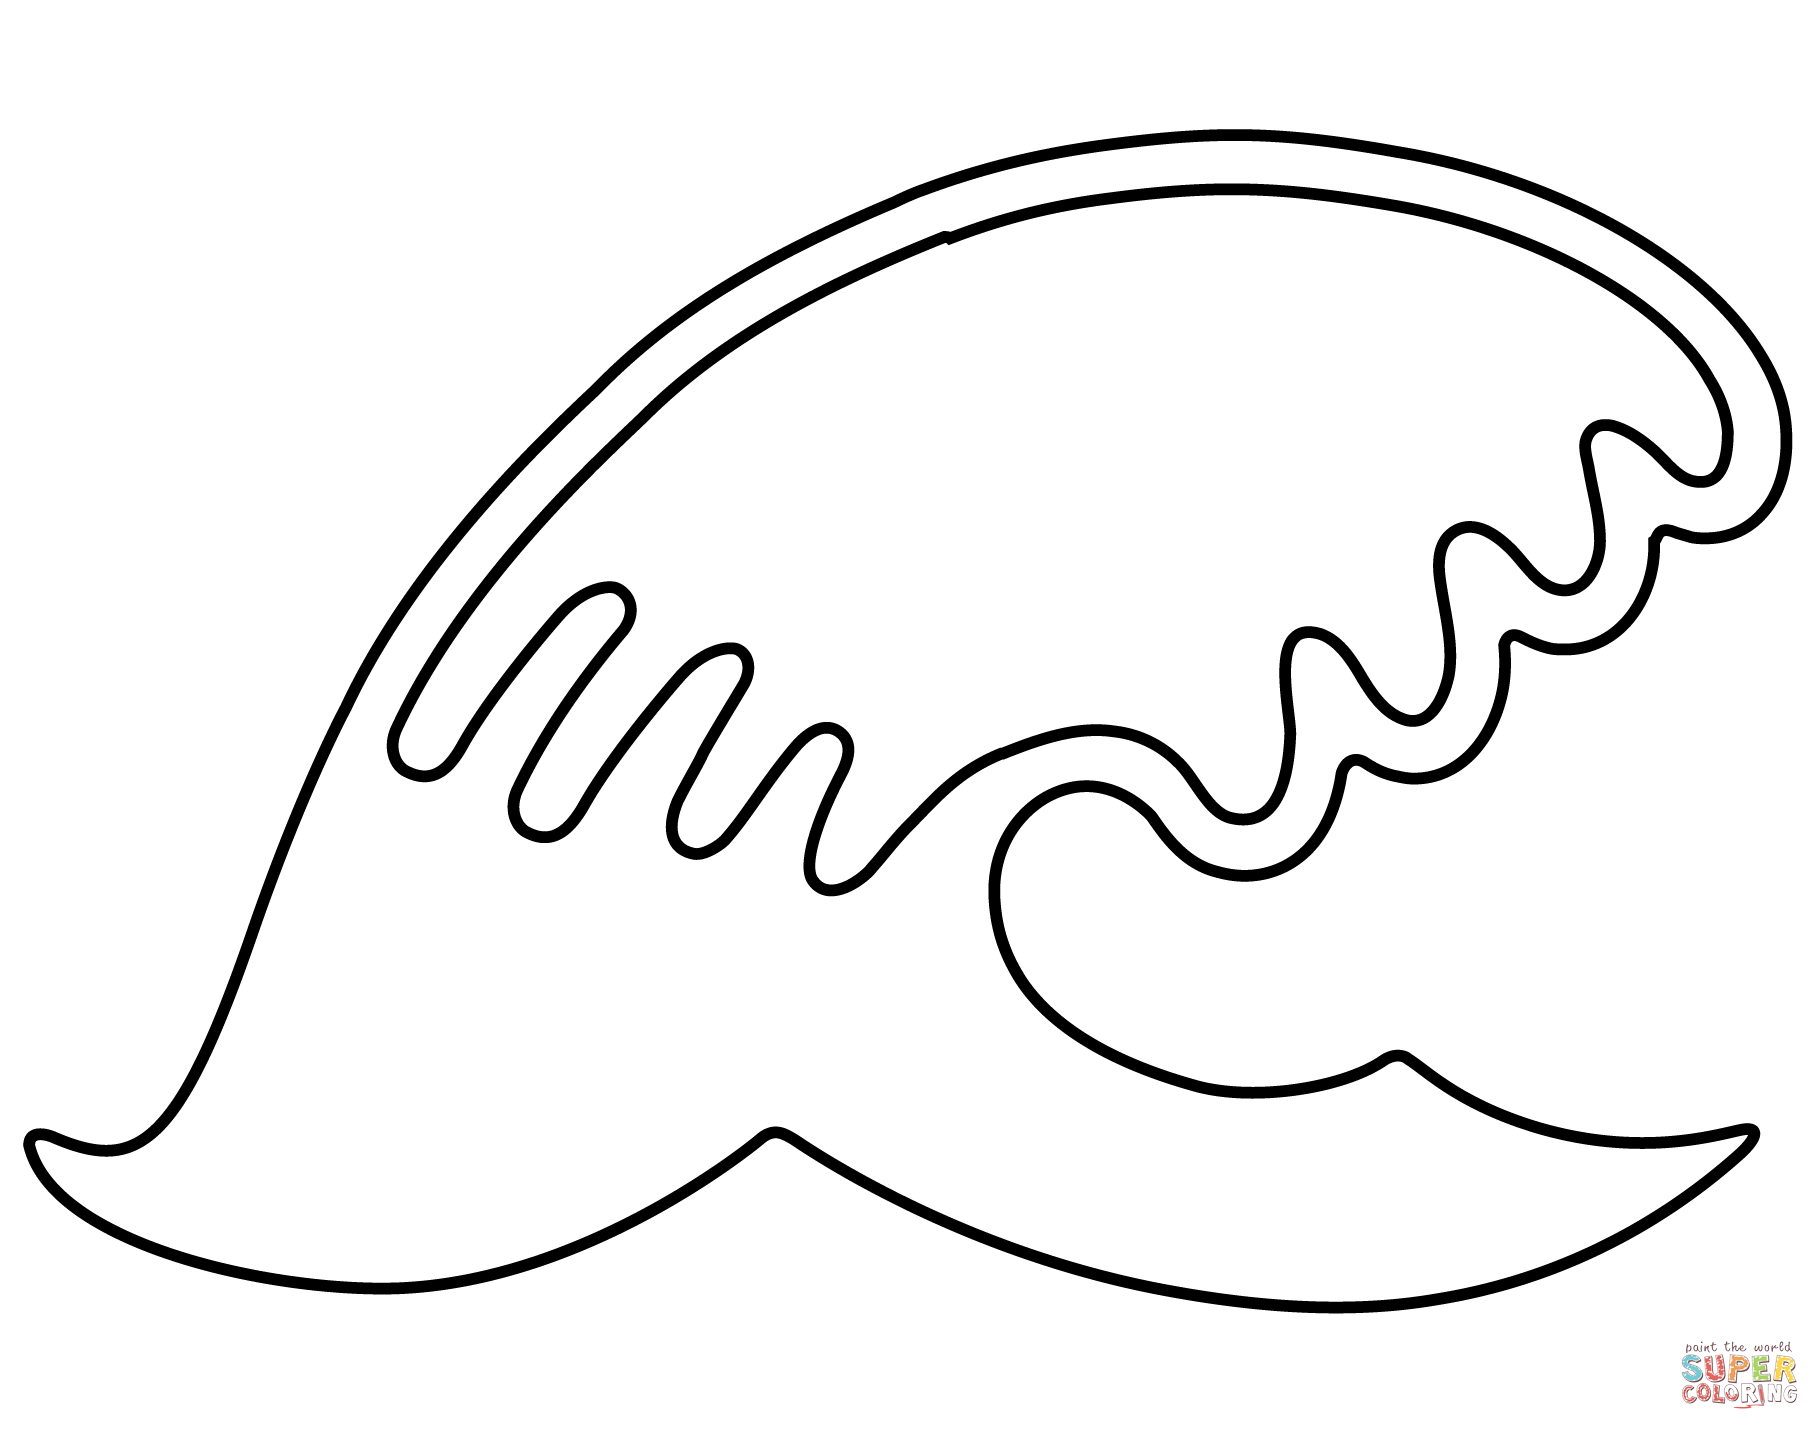 Water wave emoji coloring page free printable coloring pages